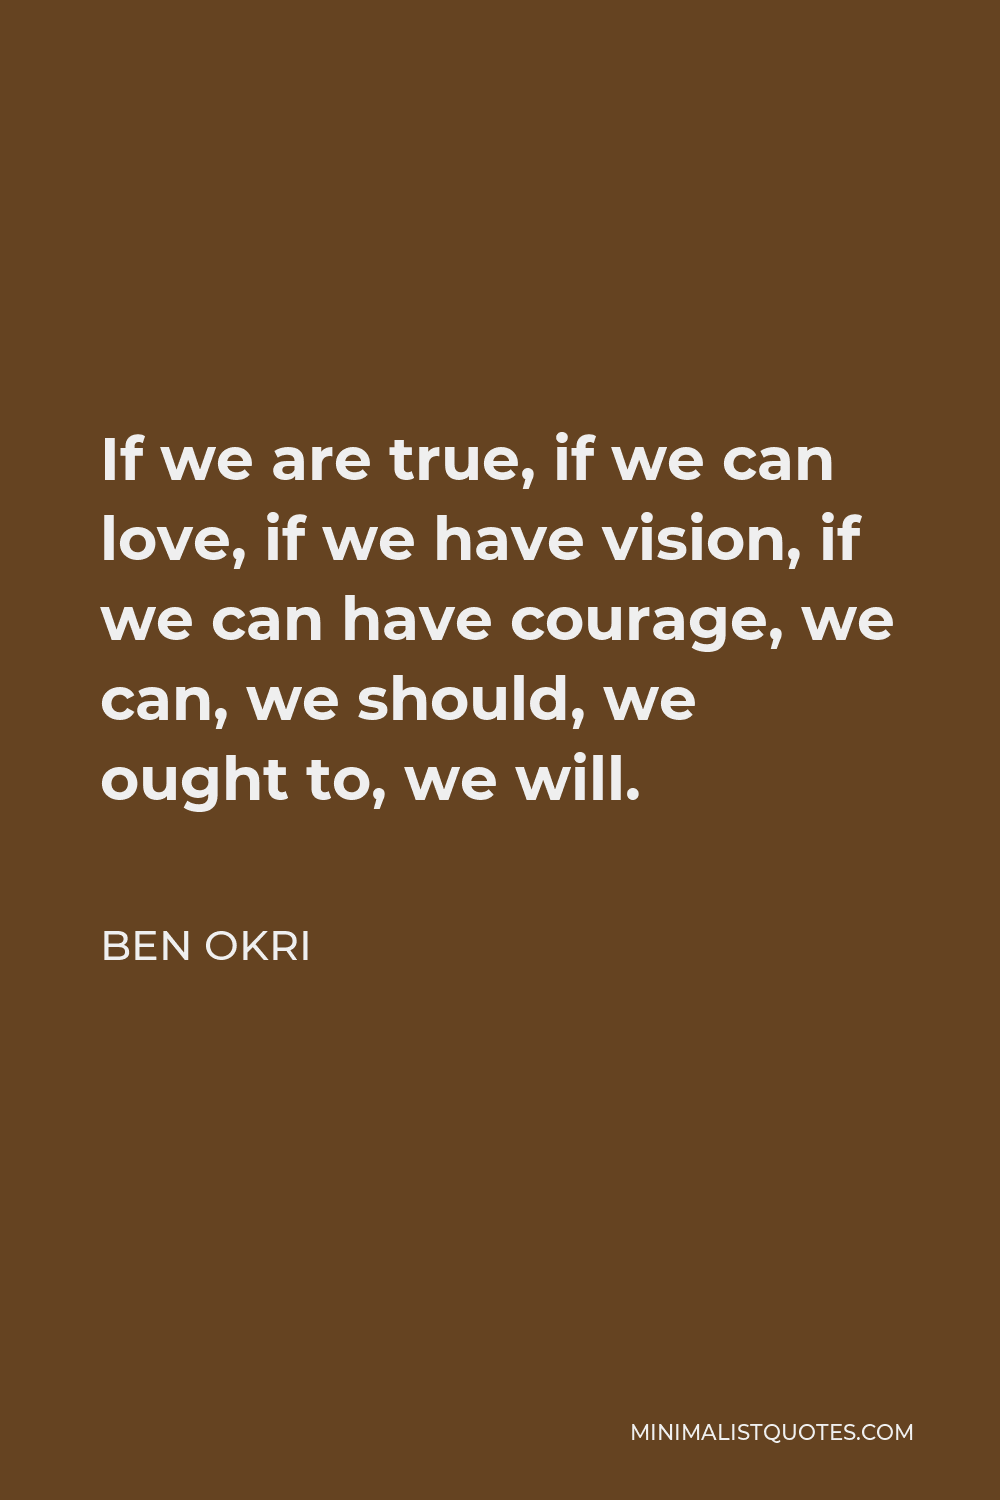 Ben Okri Quote - If we are true, if we can love, if we have vision, if we can have courage, we can, we should, we ought to, we will.